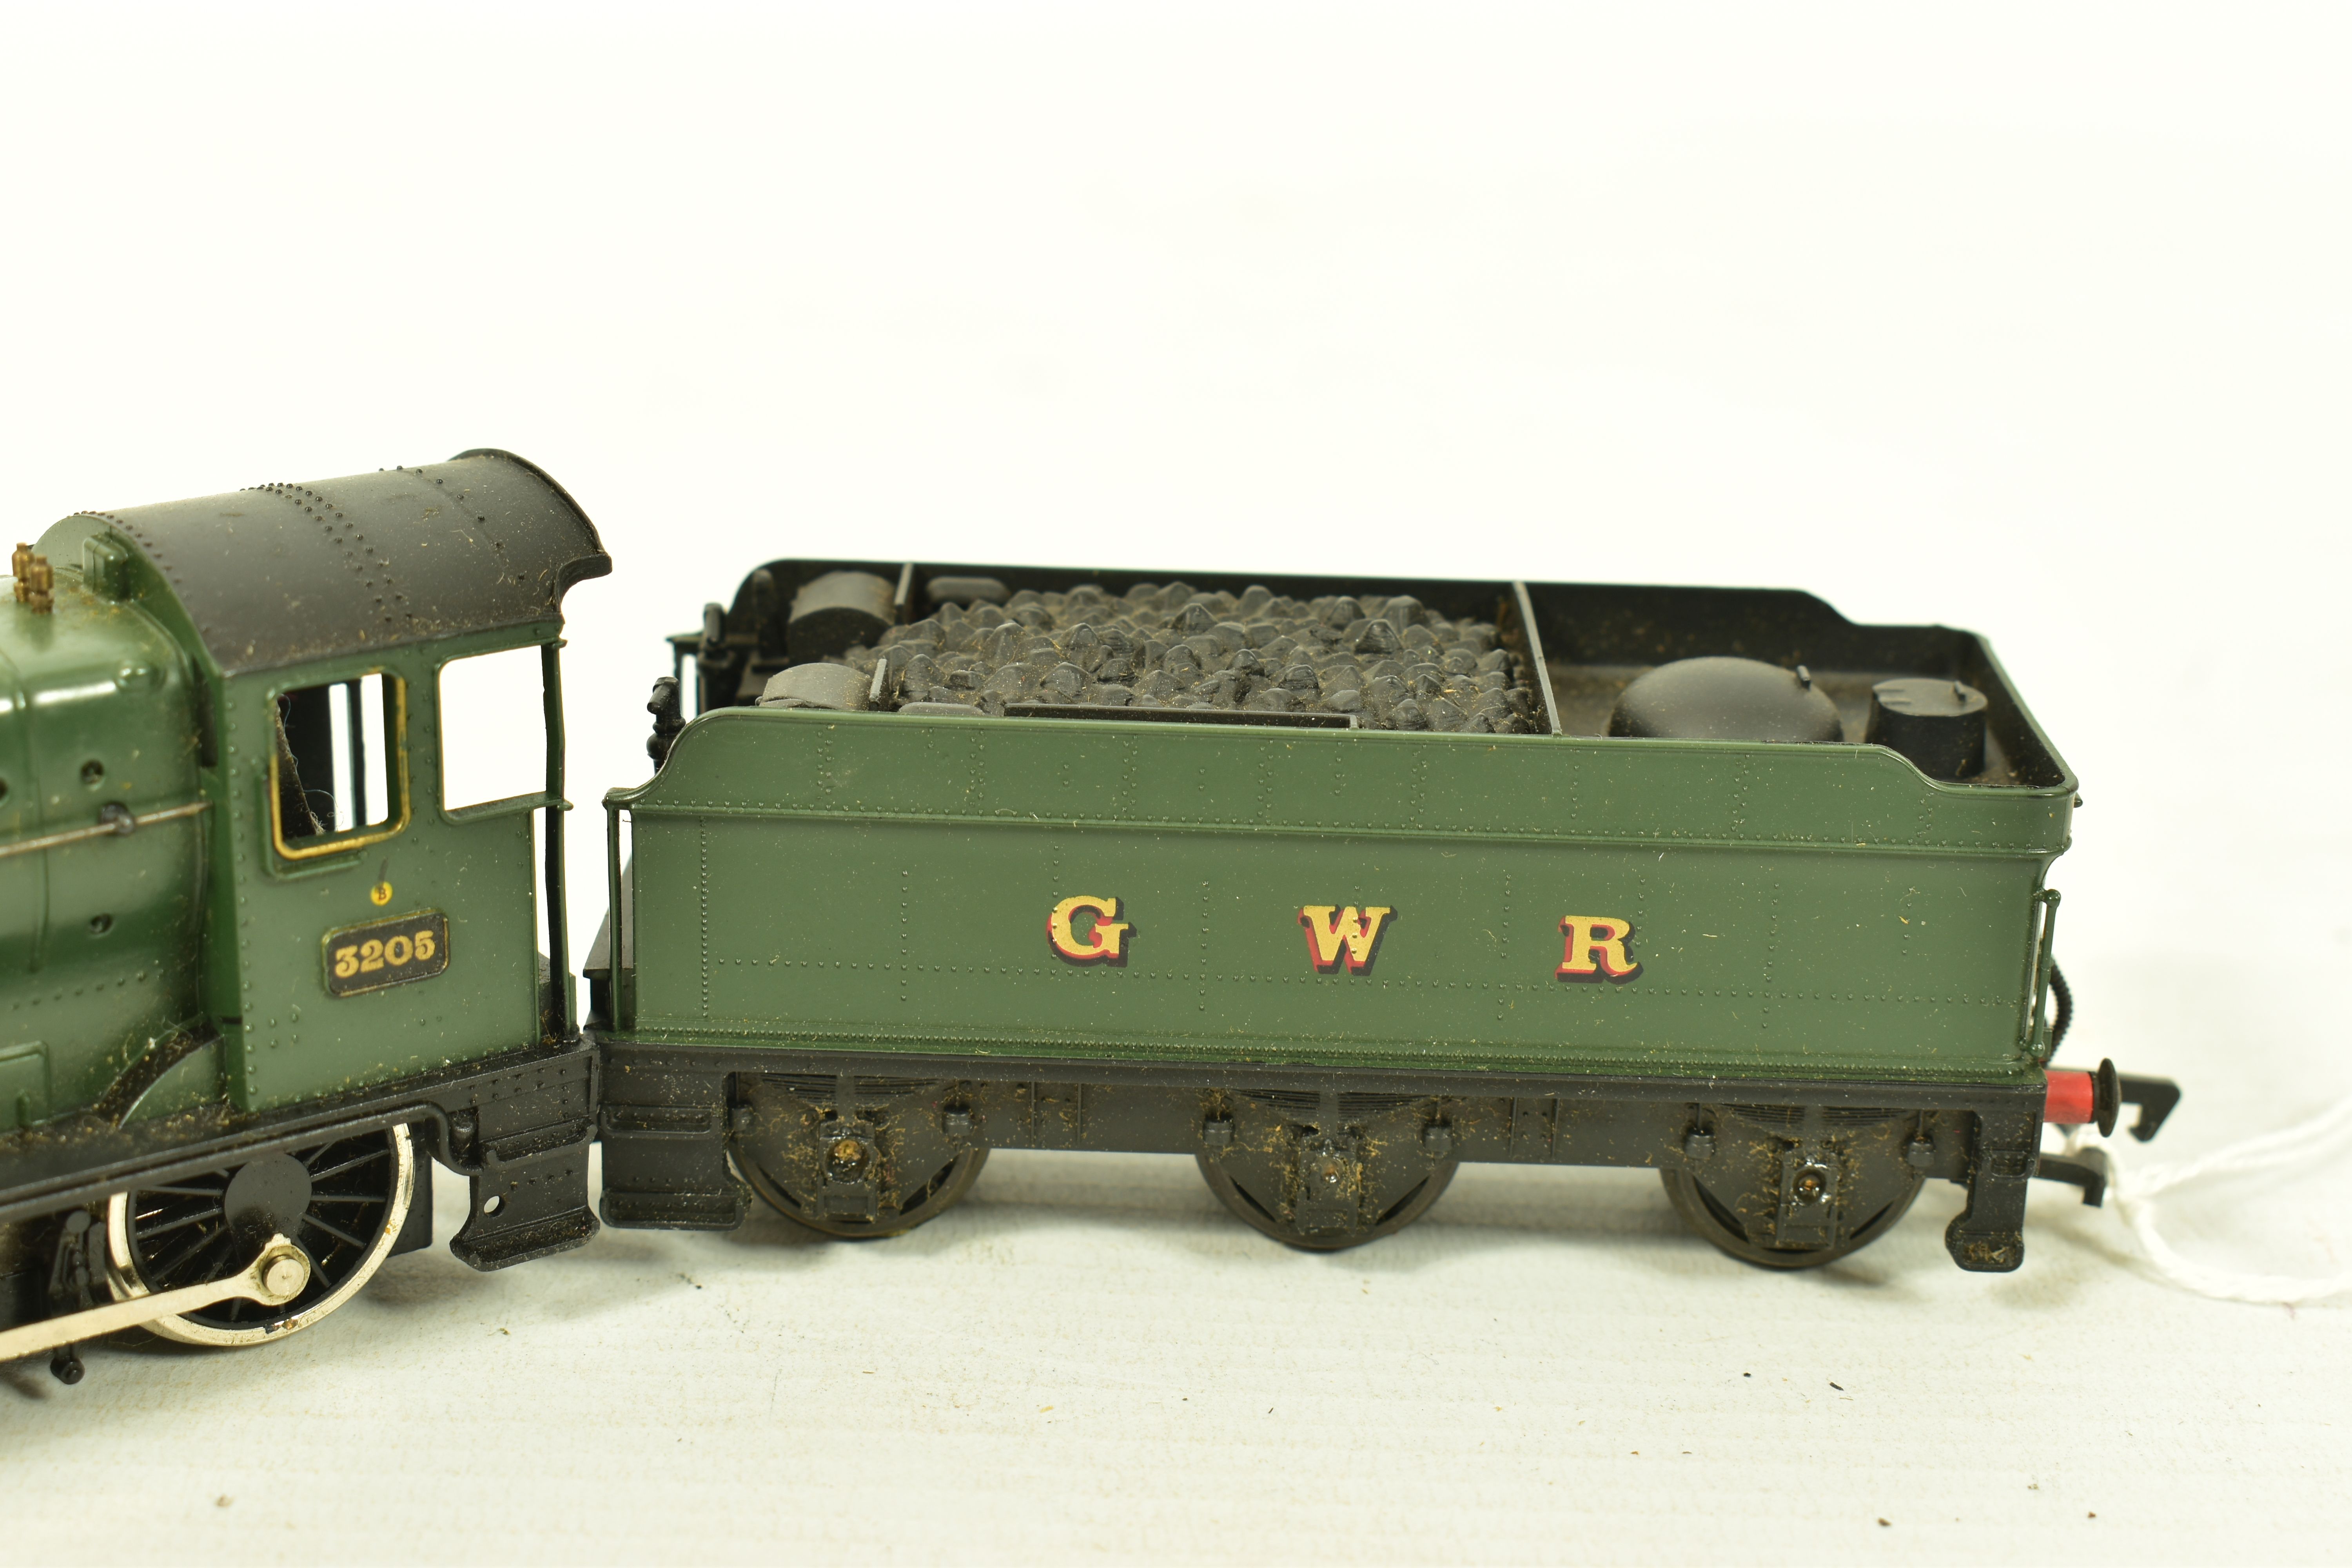 FOUR BOXED MAINLINE OO GAUGE COLLETT GOODS LOCOMOTIVES, 2 x No.3205, G.W.R. green livery (37 058), - Image 7 of 9